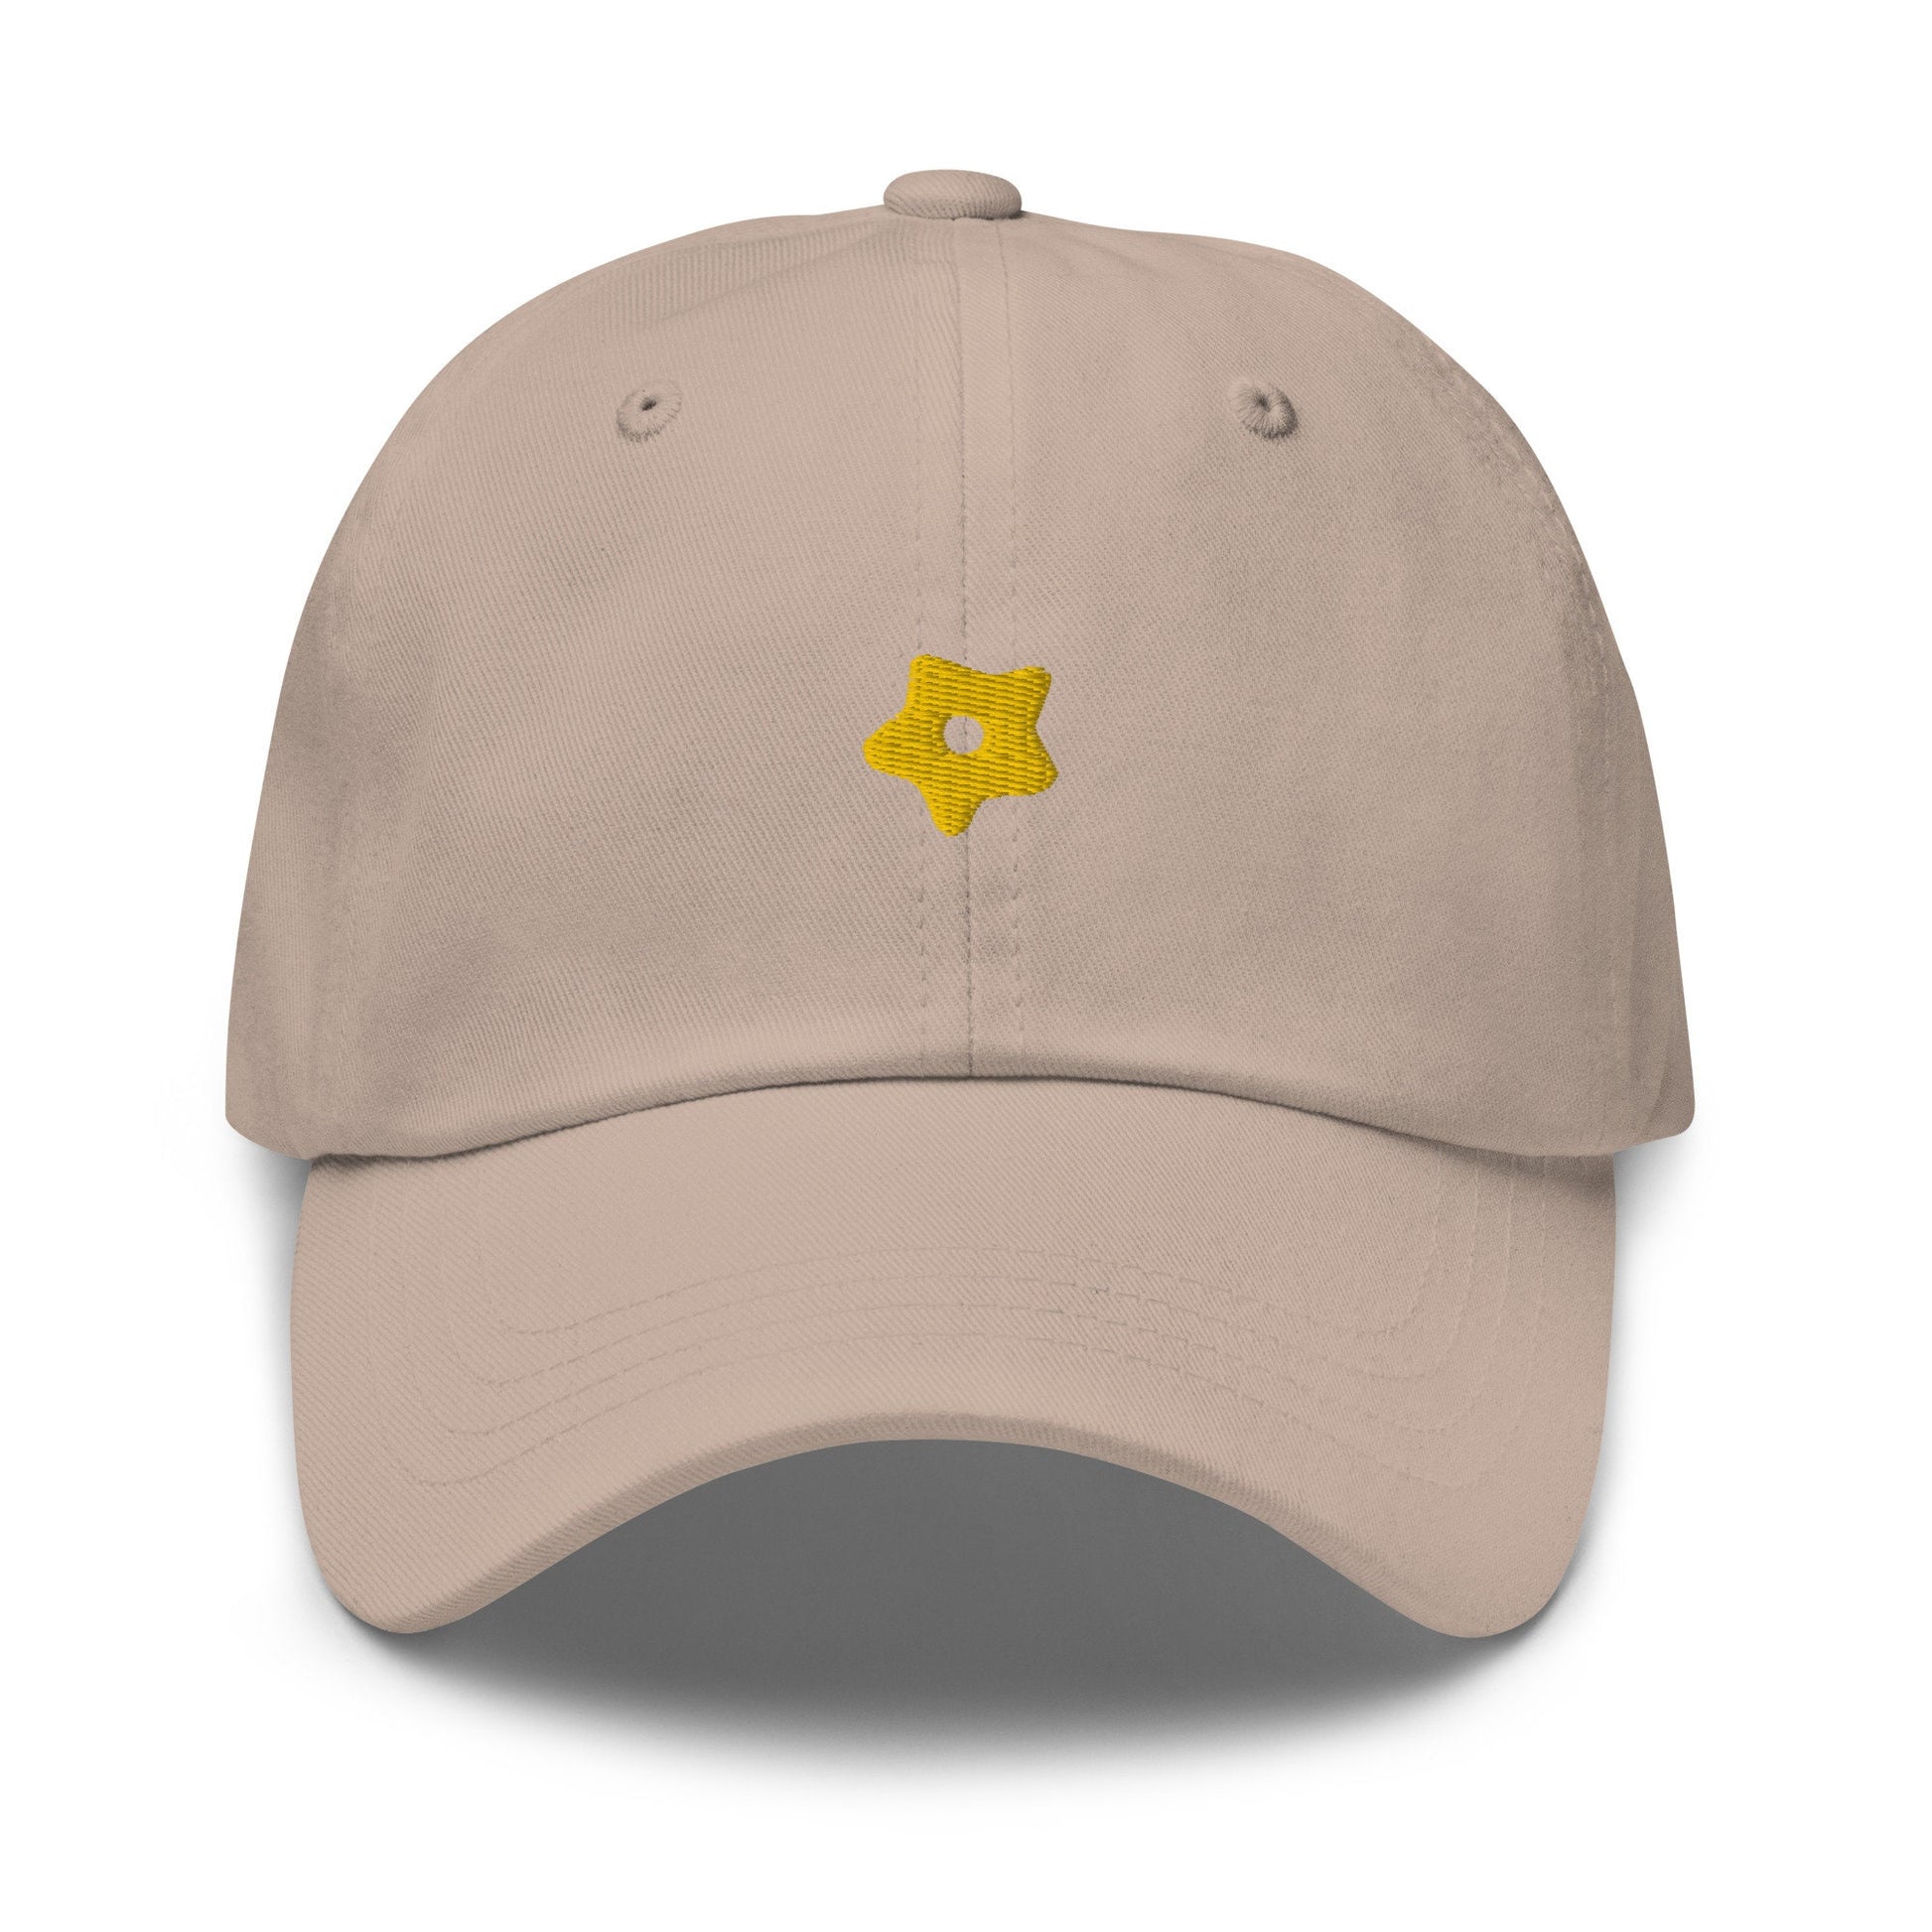 Pastina Dad Hat - Healing Broth of the Gods - Italian Pasta & Brodo Home Remedy - Minimalist Cotton embroidered Cap - Multiple Colors